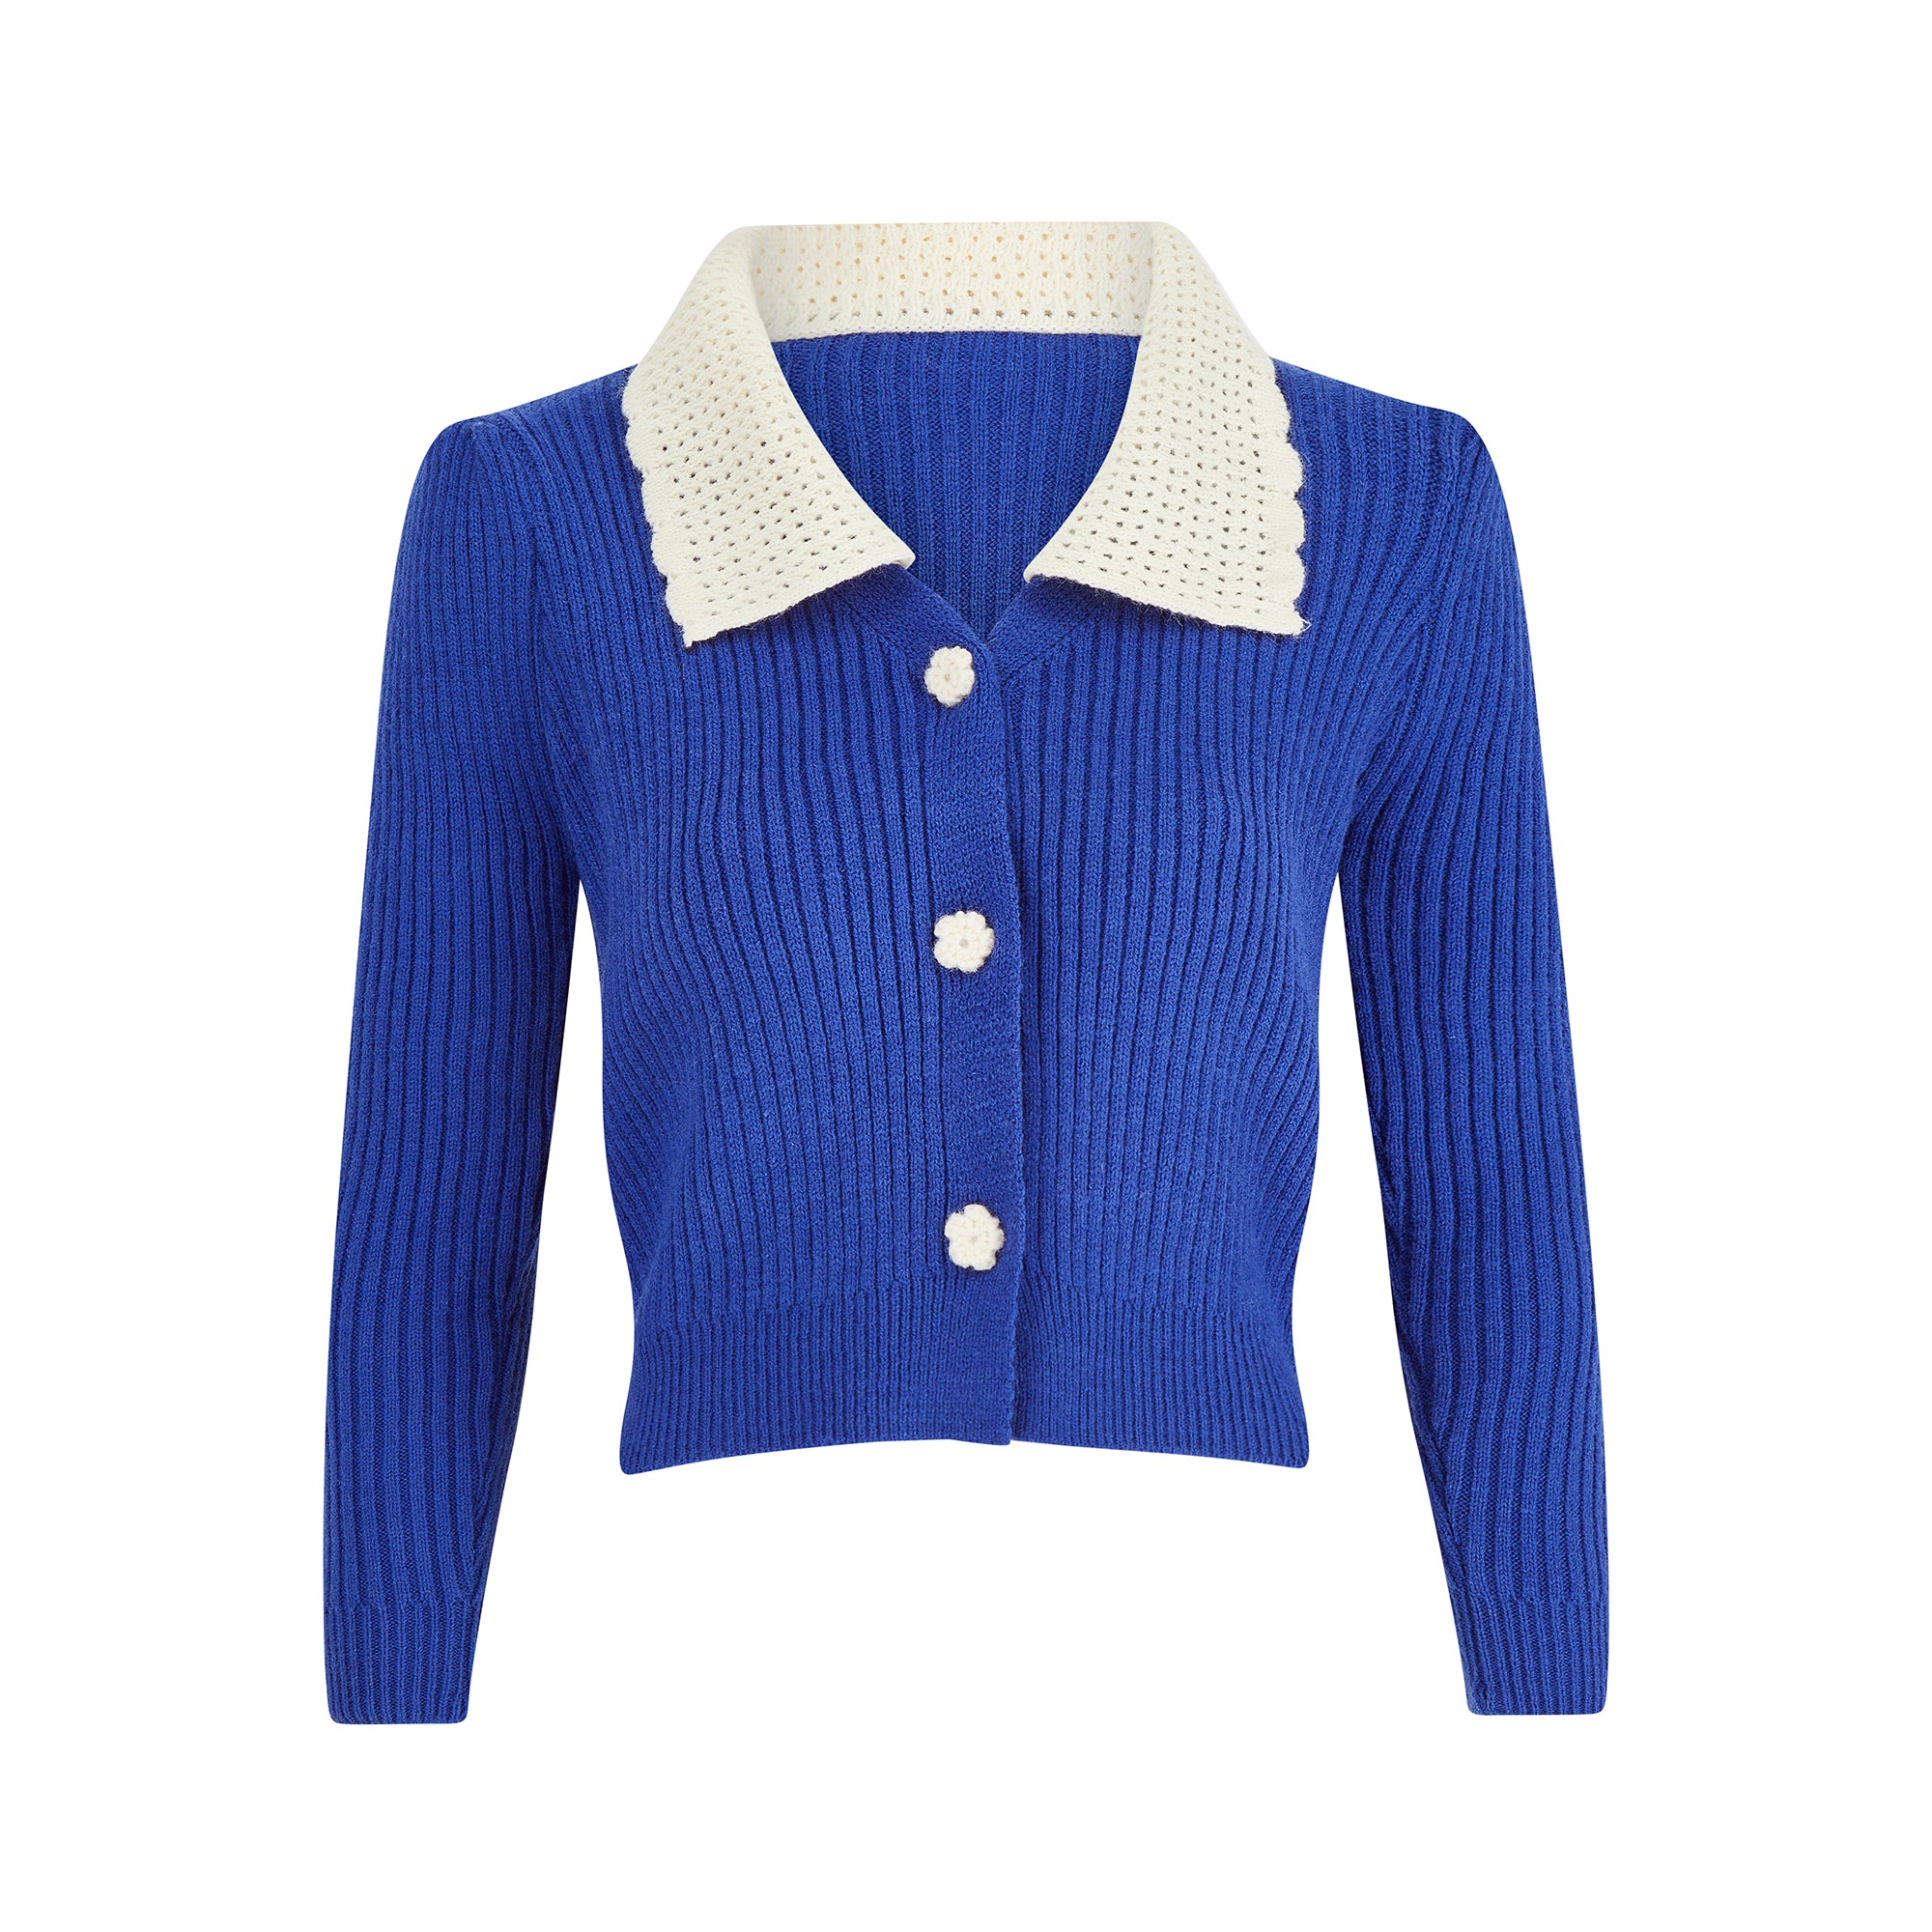 The Rhea Knit in Electric Blue